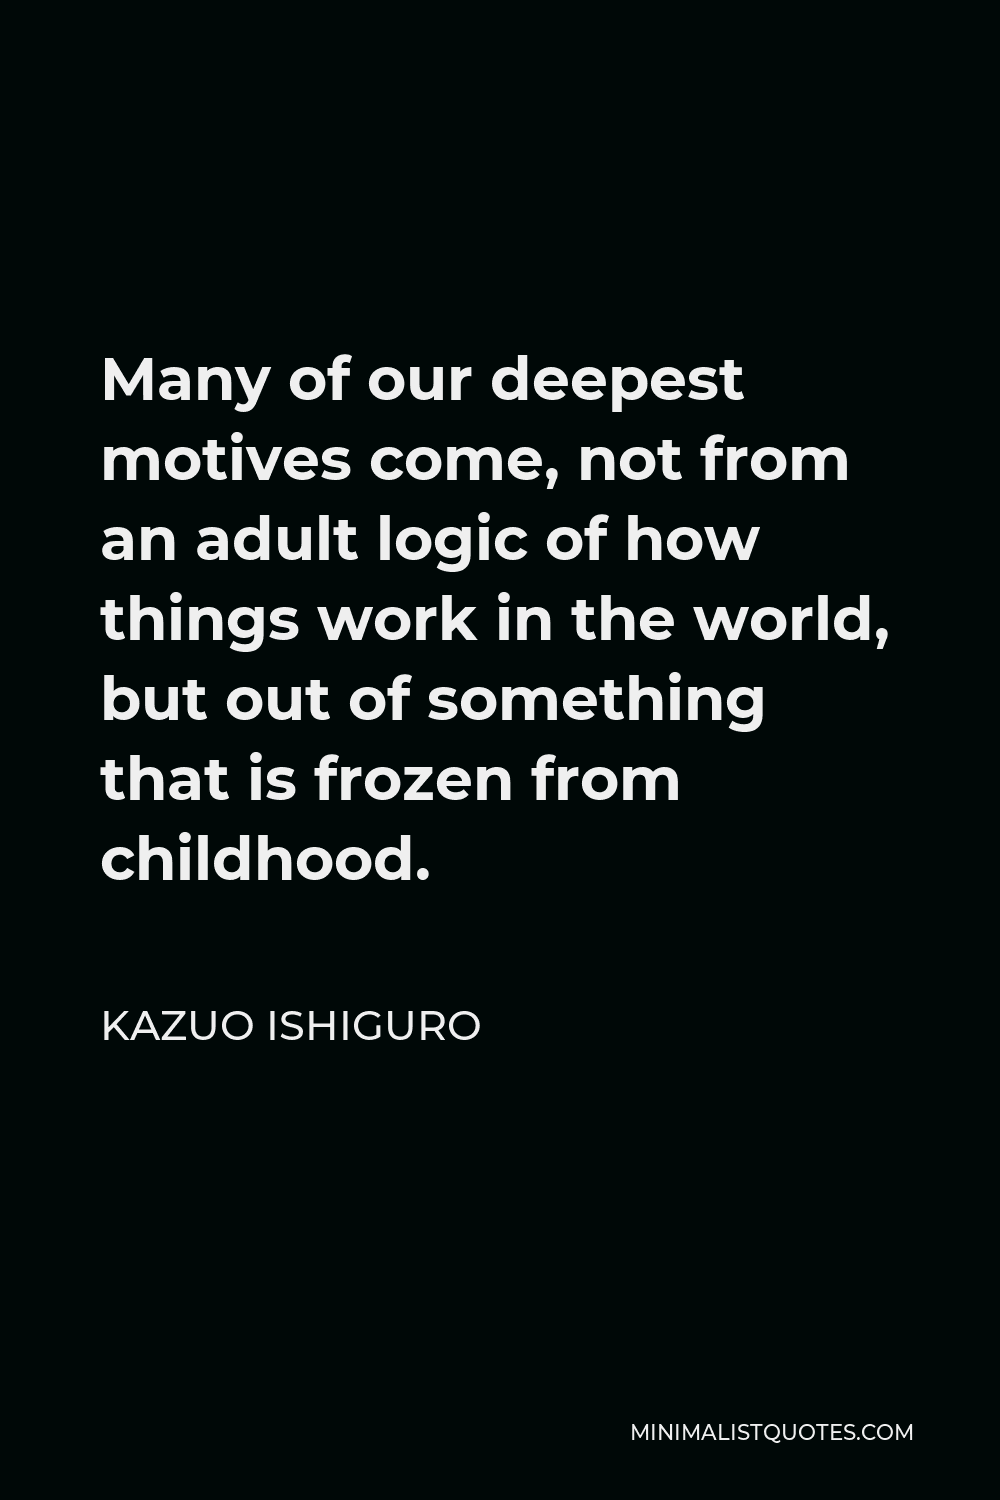 Kazuo Ishiguro Quote - Many of our deepest motives come, not from an adult logic of how things work in the world, but out of something that is frozen from childhood.